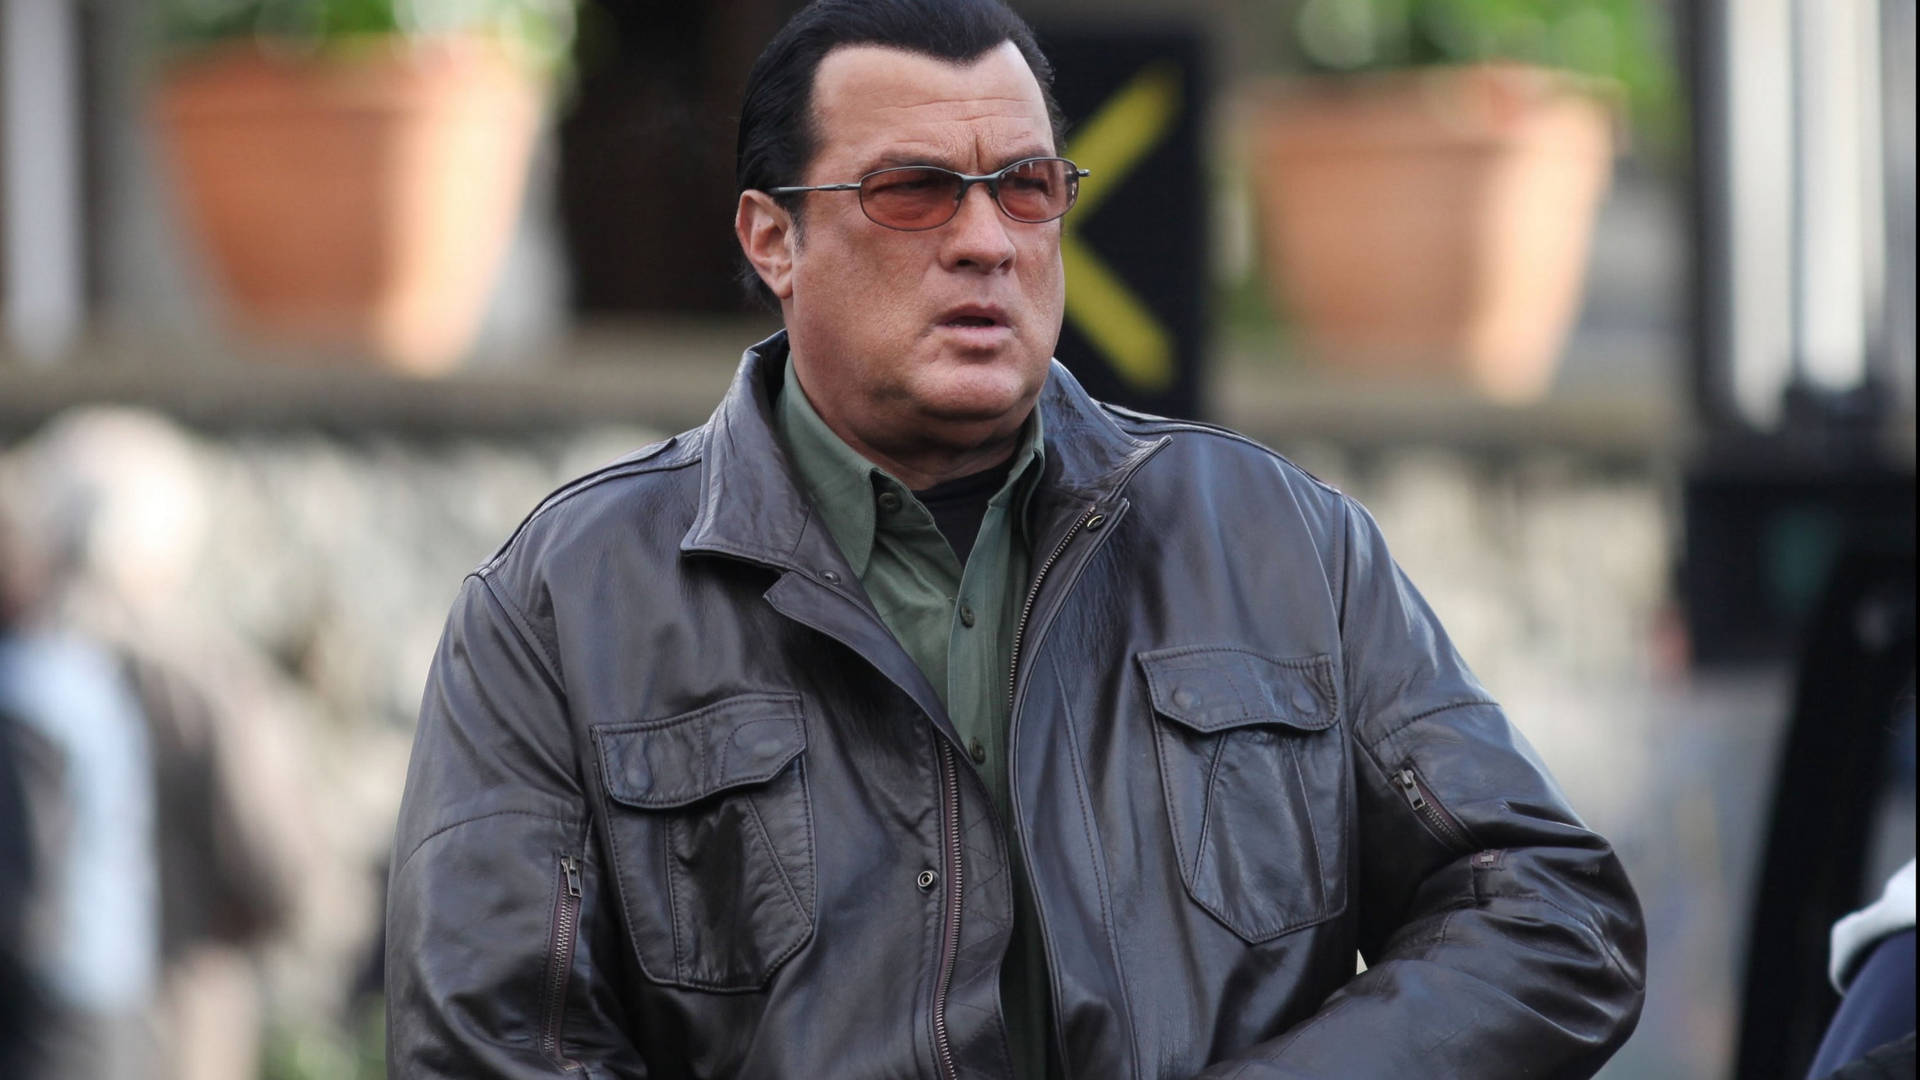 Steven Seagal: An Embodiment Of Action And Activism Background